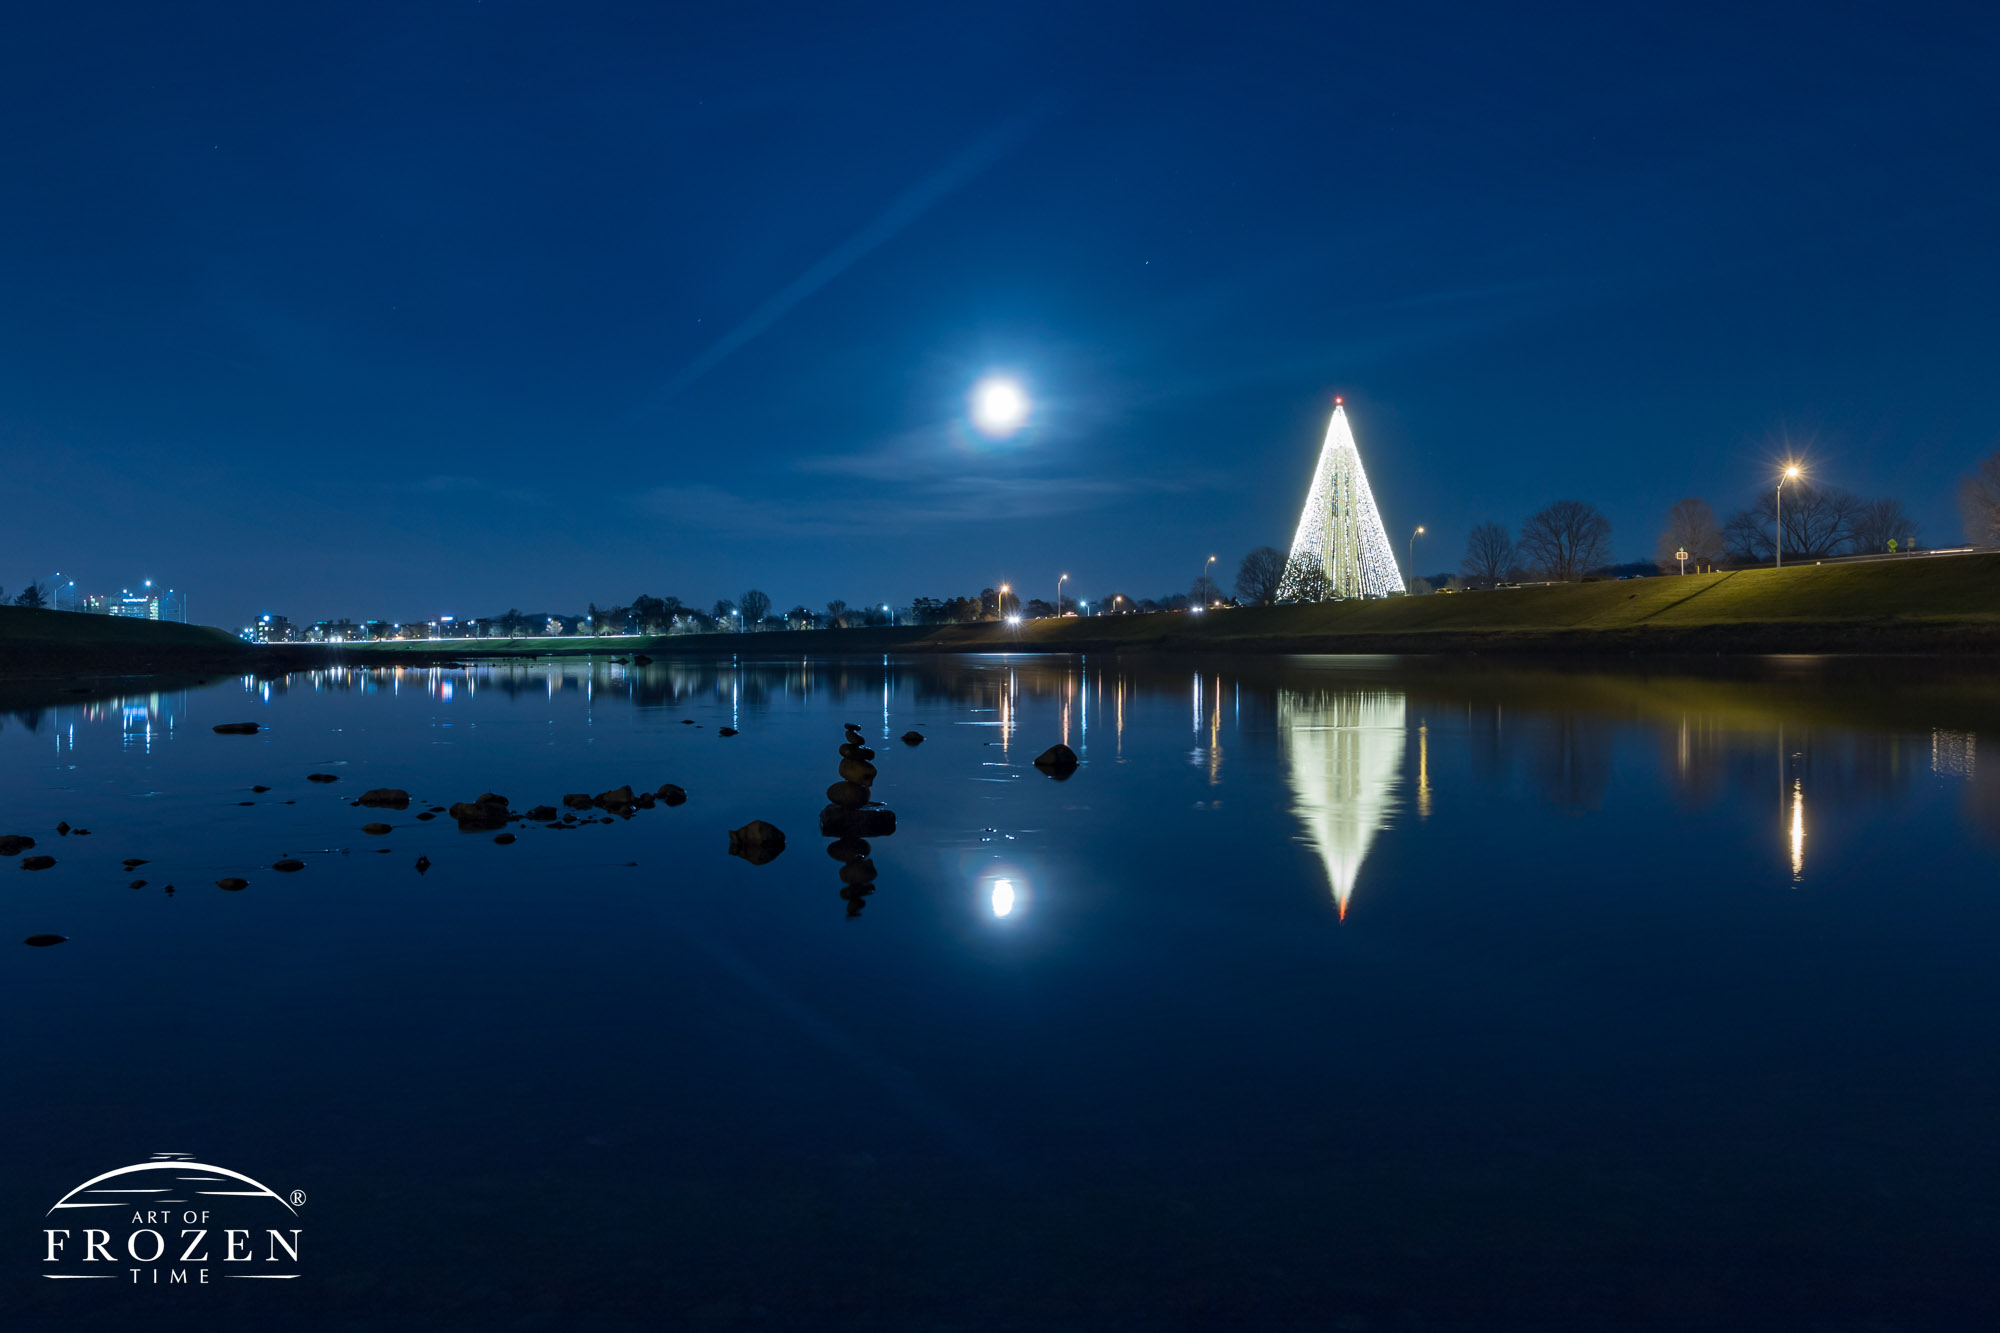 A nightscape where Deeds Carillon Tree of Light reflects in the still waters of the Great Miami River as the December full moon takes to the sky